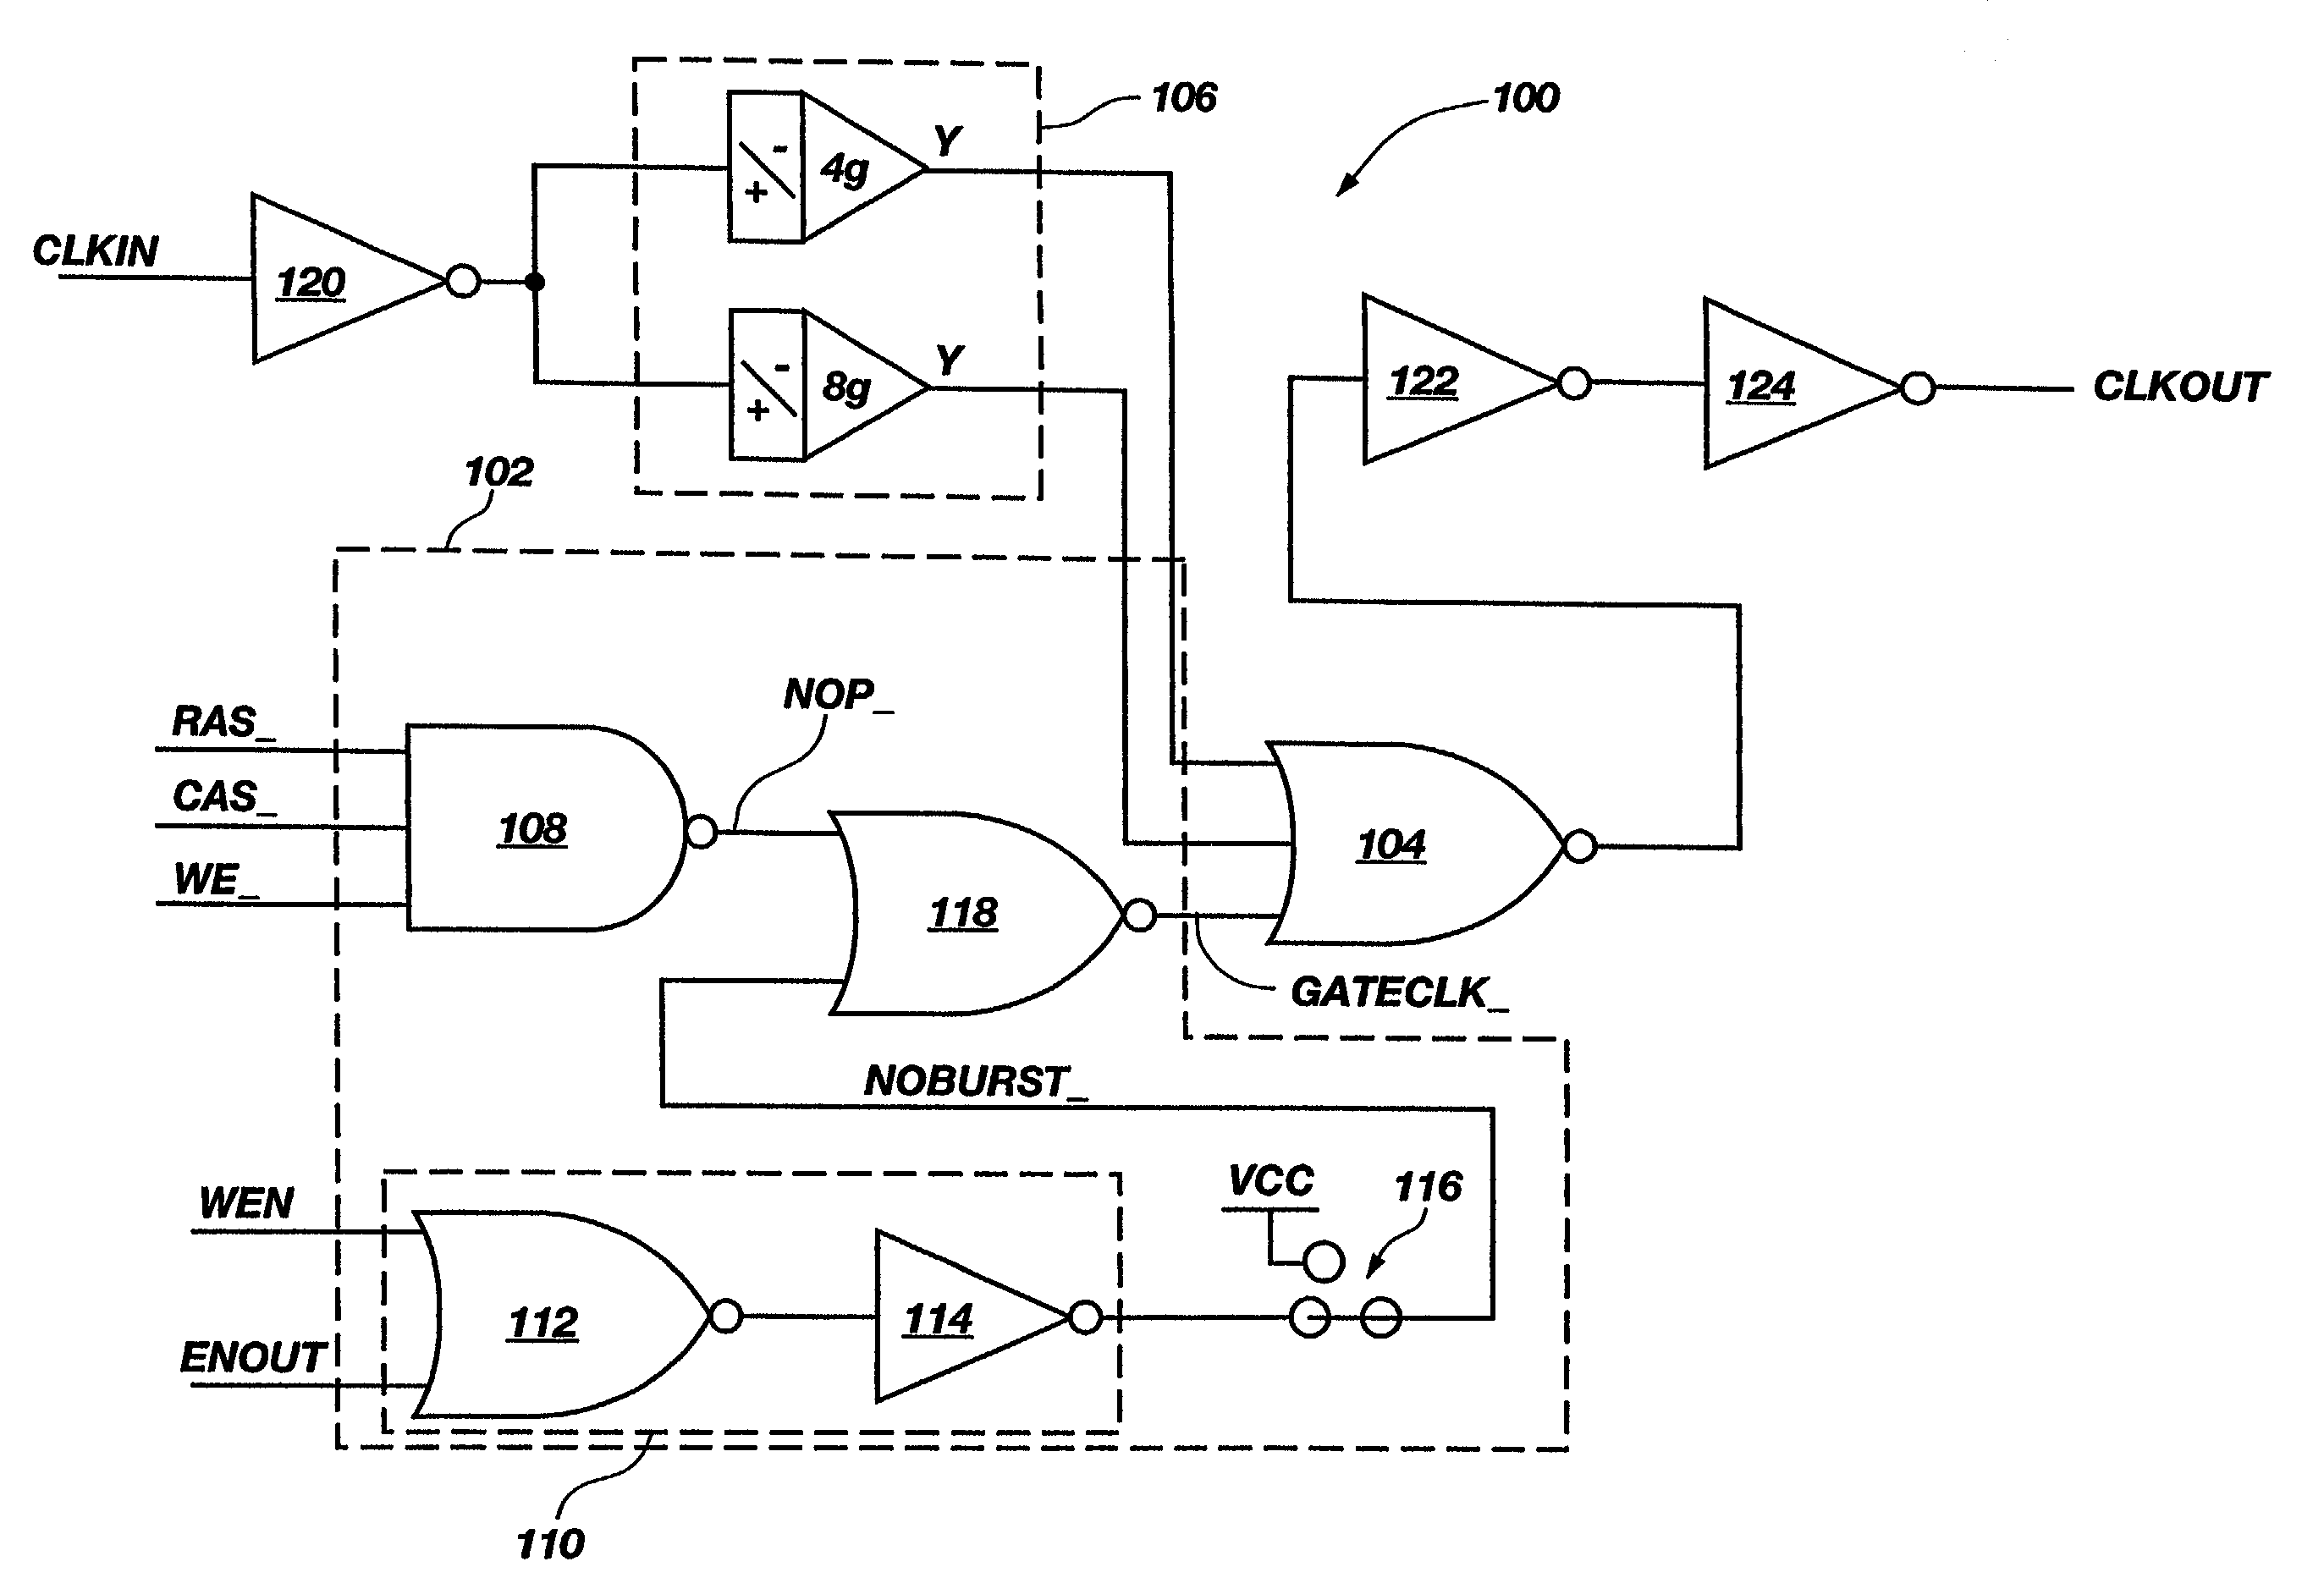 Circuit, system and method for selectively turning off internal clock drivers